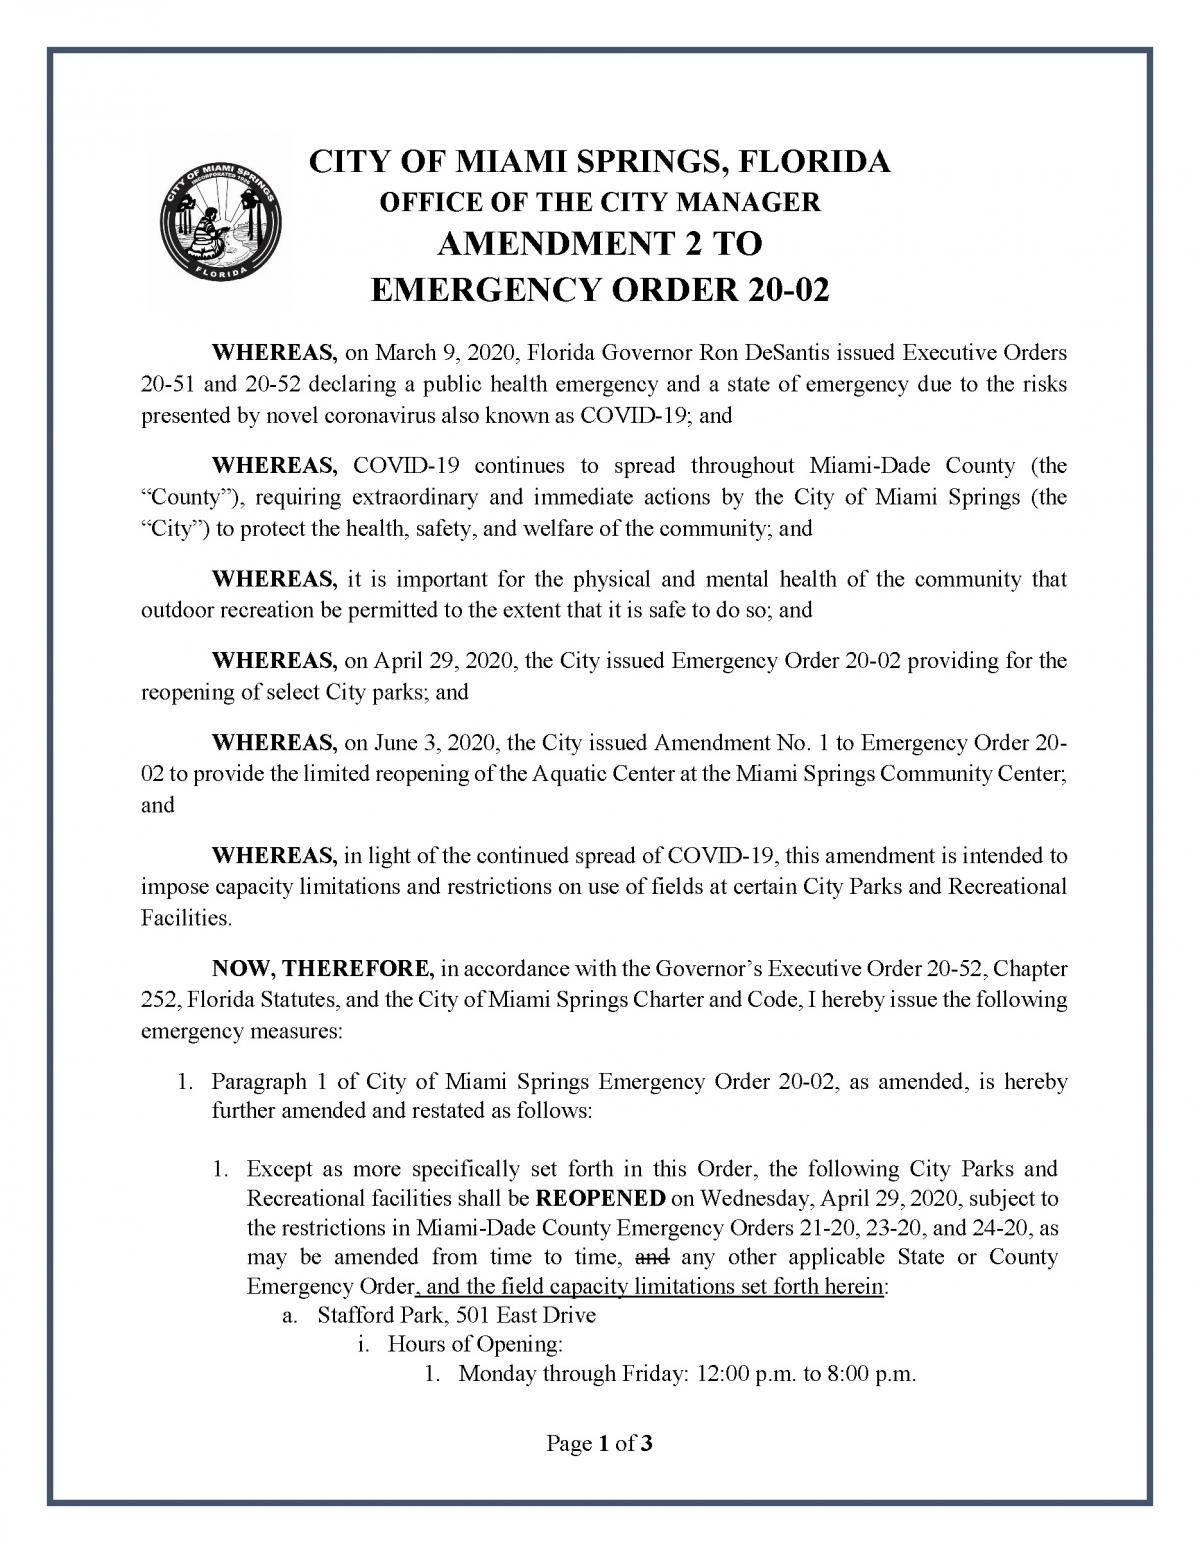 The City of Miami Springs Has Issued Amendment #2 to Emergency Order 20-02 (Effective Noon, June 29, 2020)